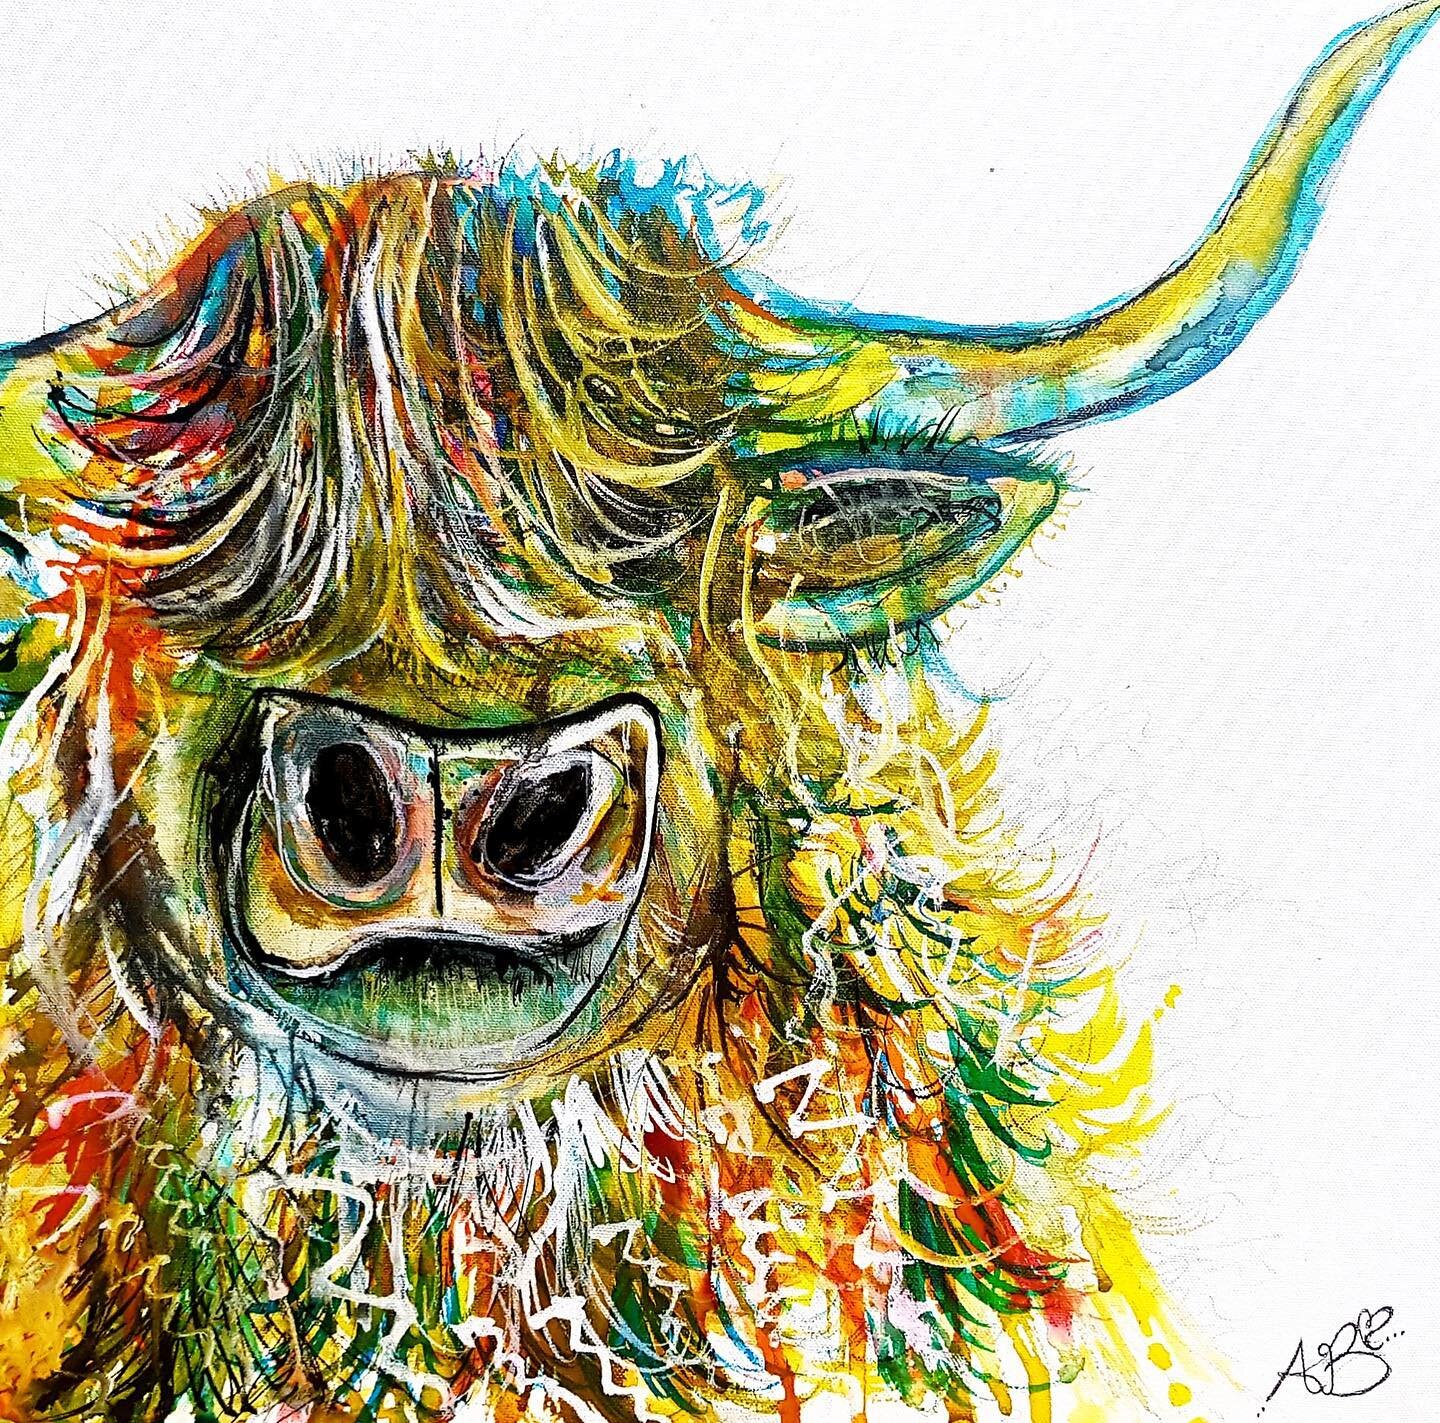 Hiya!! Hope everyone is safe and well! 💕 Here is Cecil to make your evening a little brighter! 🌈💛🐂
.
.
Inks and Watercolours on Canvas. [42 x 60cm] #ashebickillustrations #quirkyanimalseries #commission #canvas #inks #watercolours #colourpop #bel